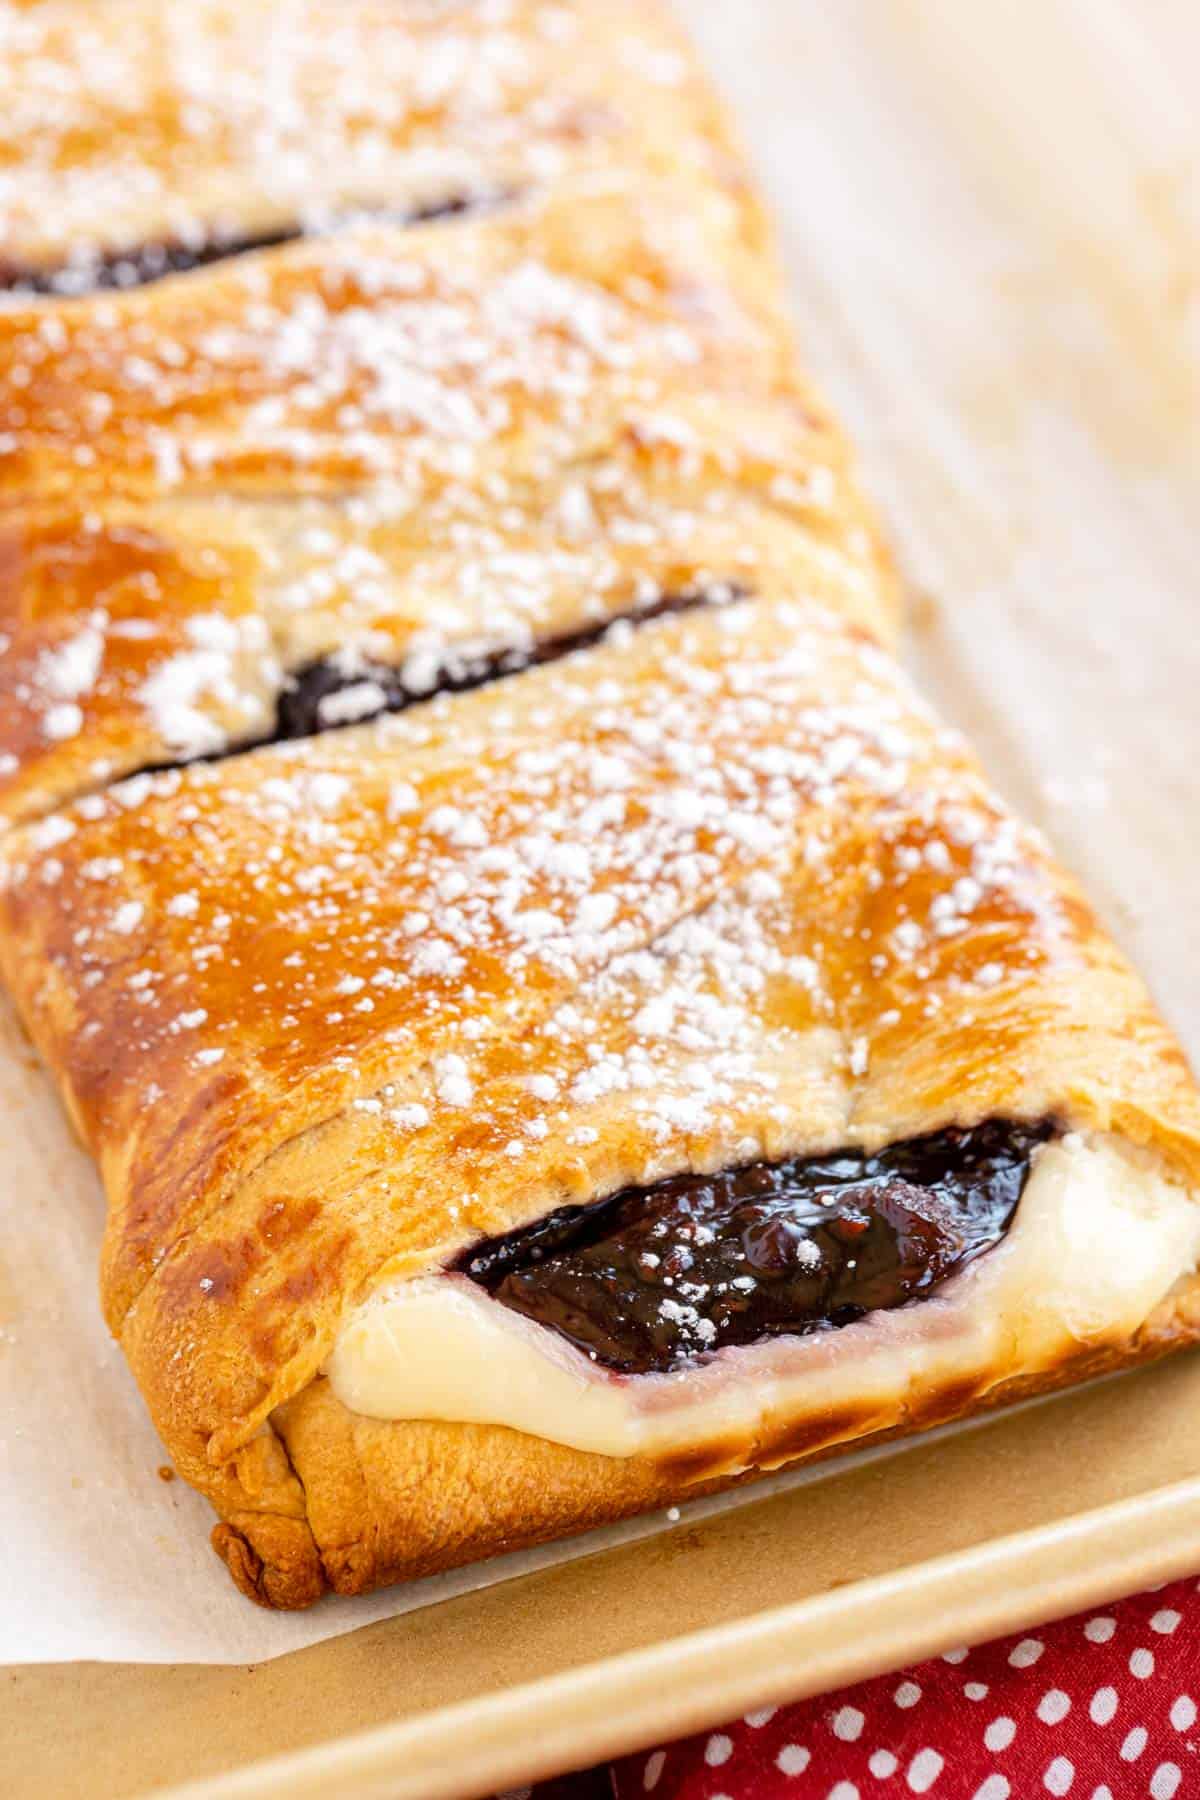 A raspberry-filled pastry braid.